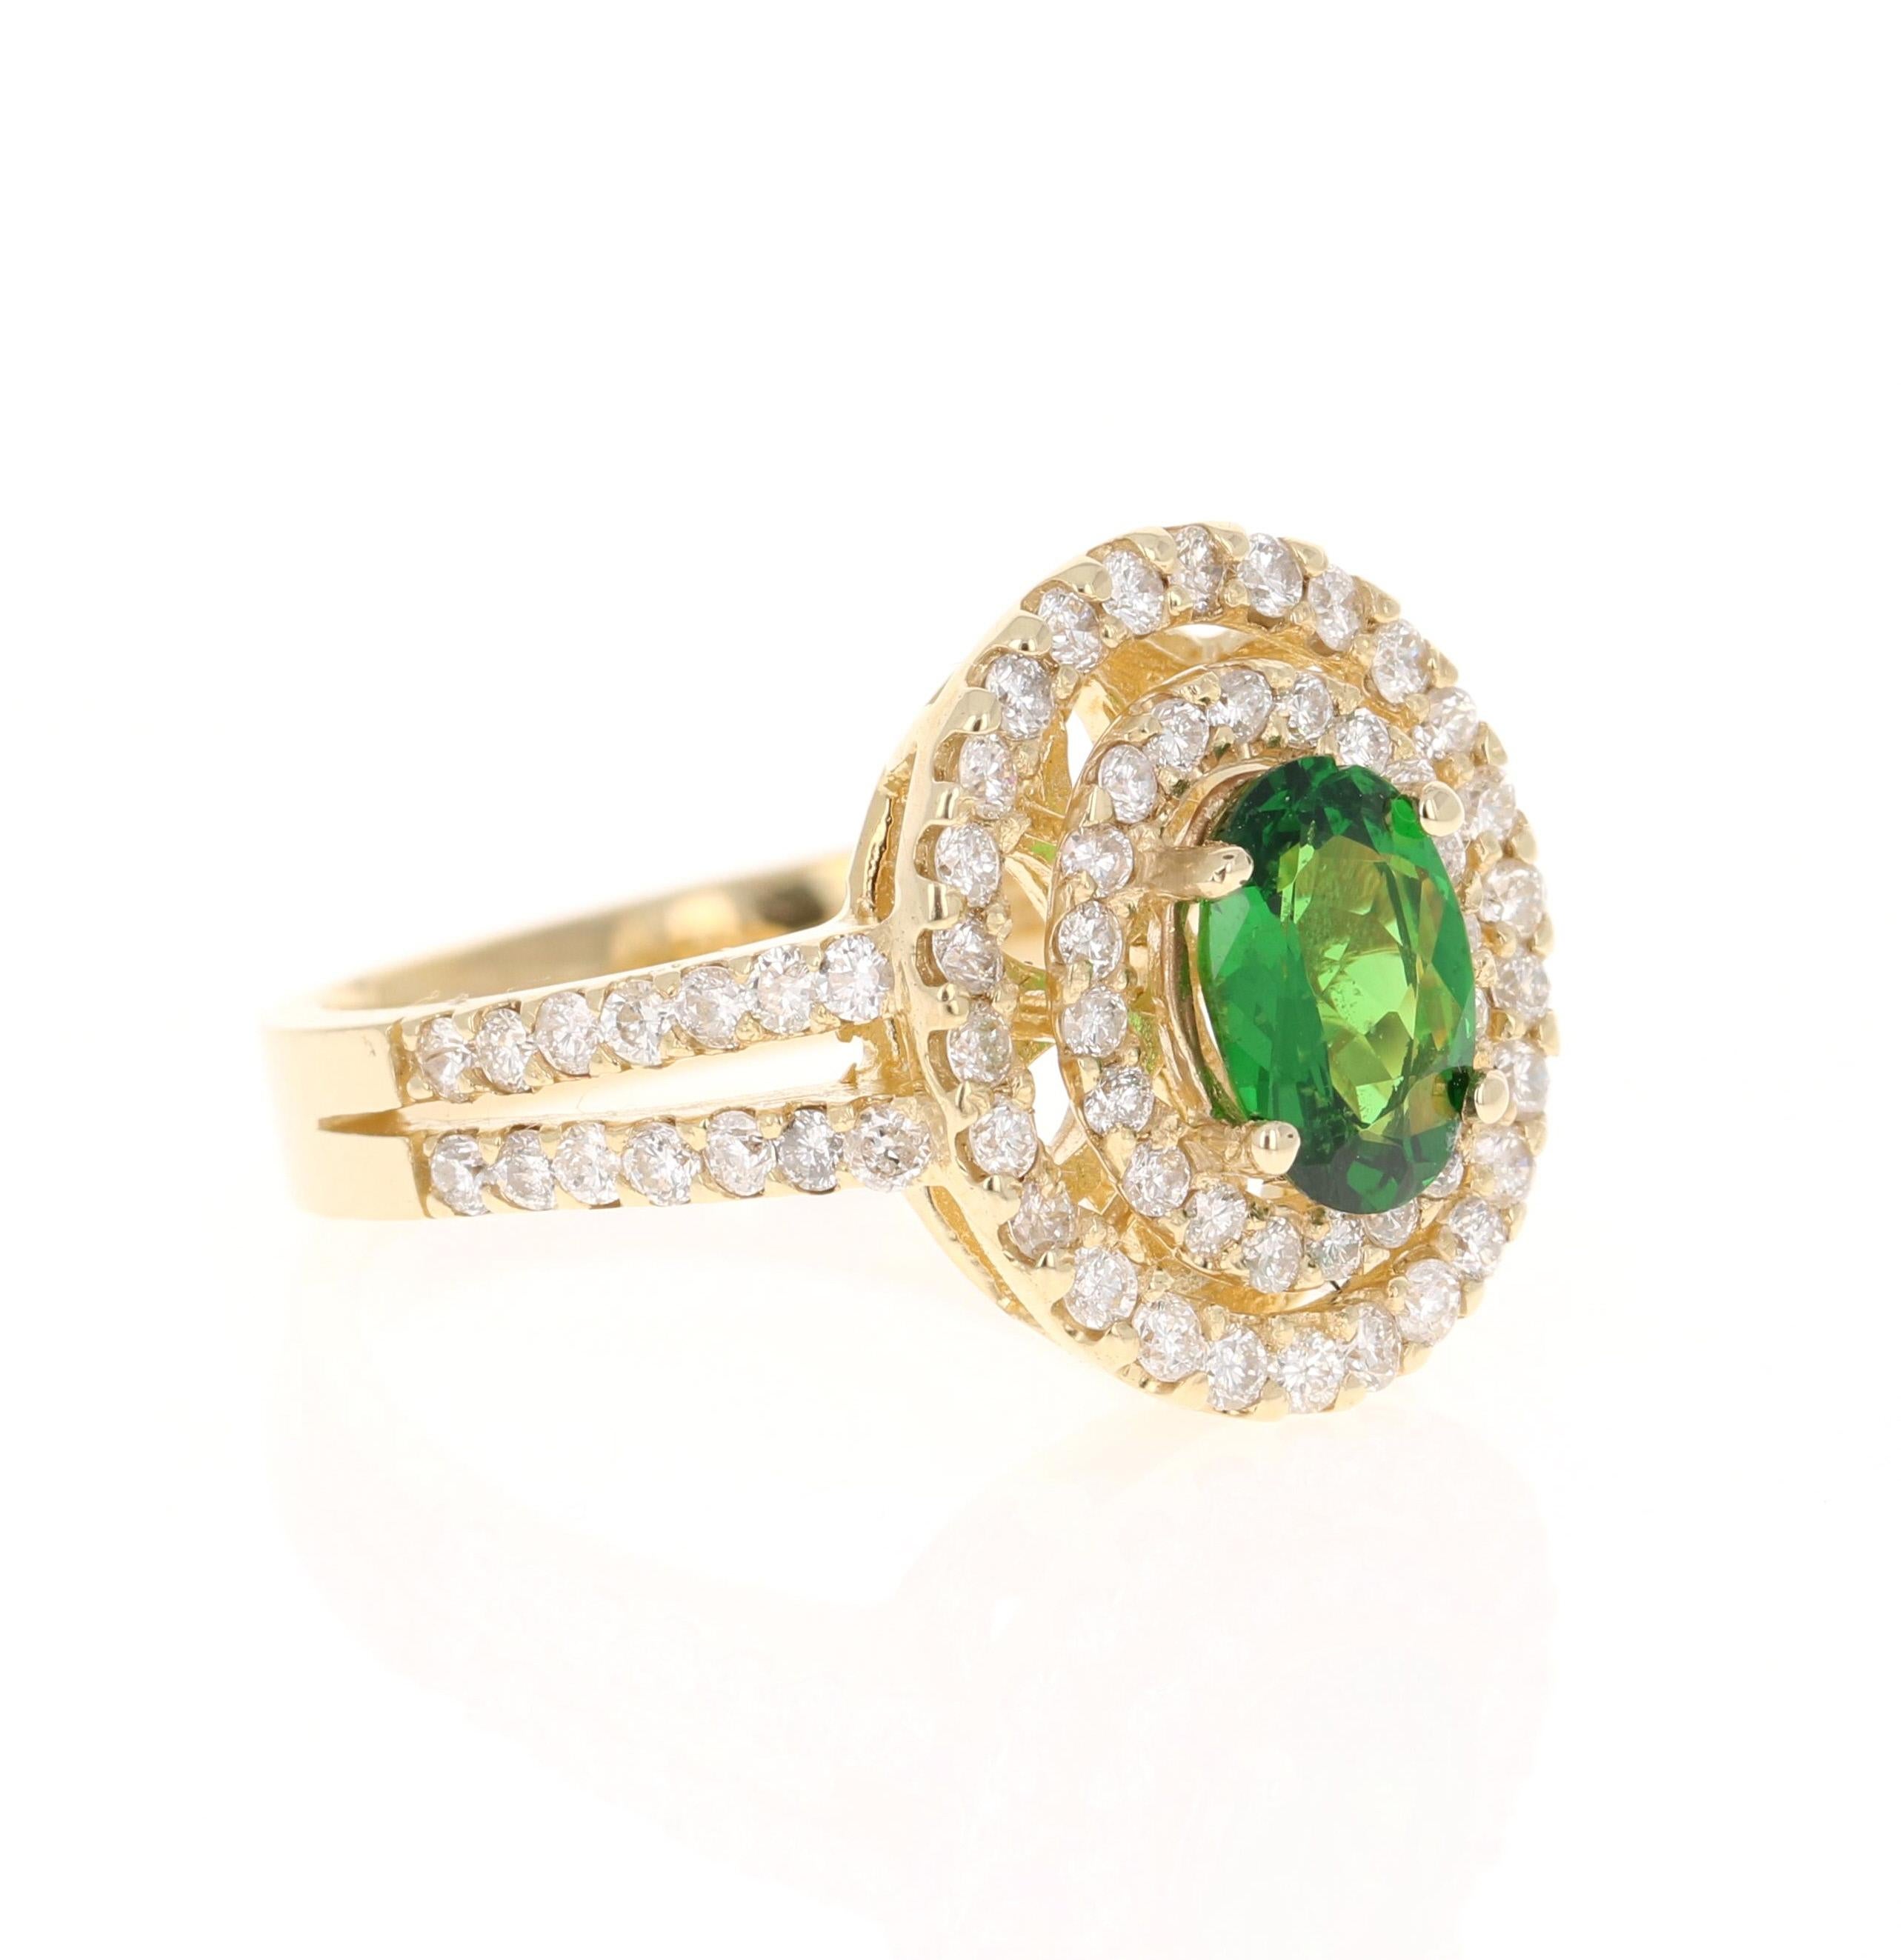 This beautiful ring has a Oval Cut Tsavorite that is 1.12 Carats and 74 Round Cut Diamonds that weigh 1.07 Carats. (Clarity: SI, Color: F) The total carat weight of the ring is 2.19 Carats. 

Tsavorite is a natural stone that belongs to the Garnet